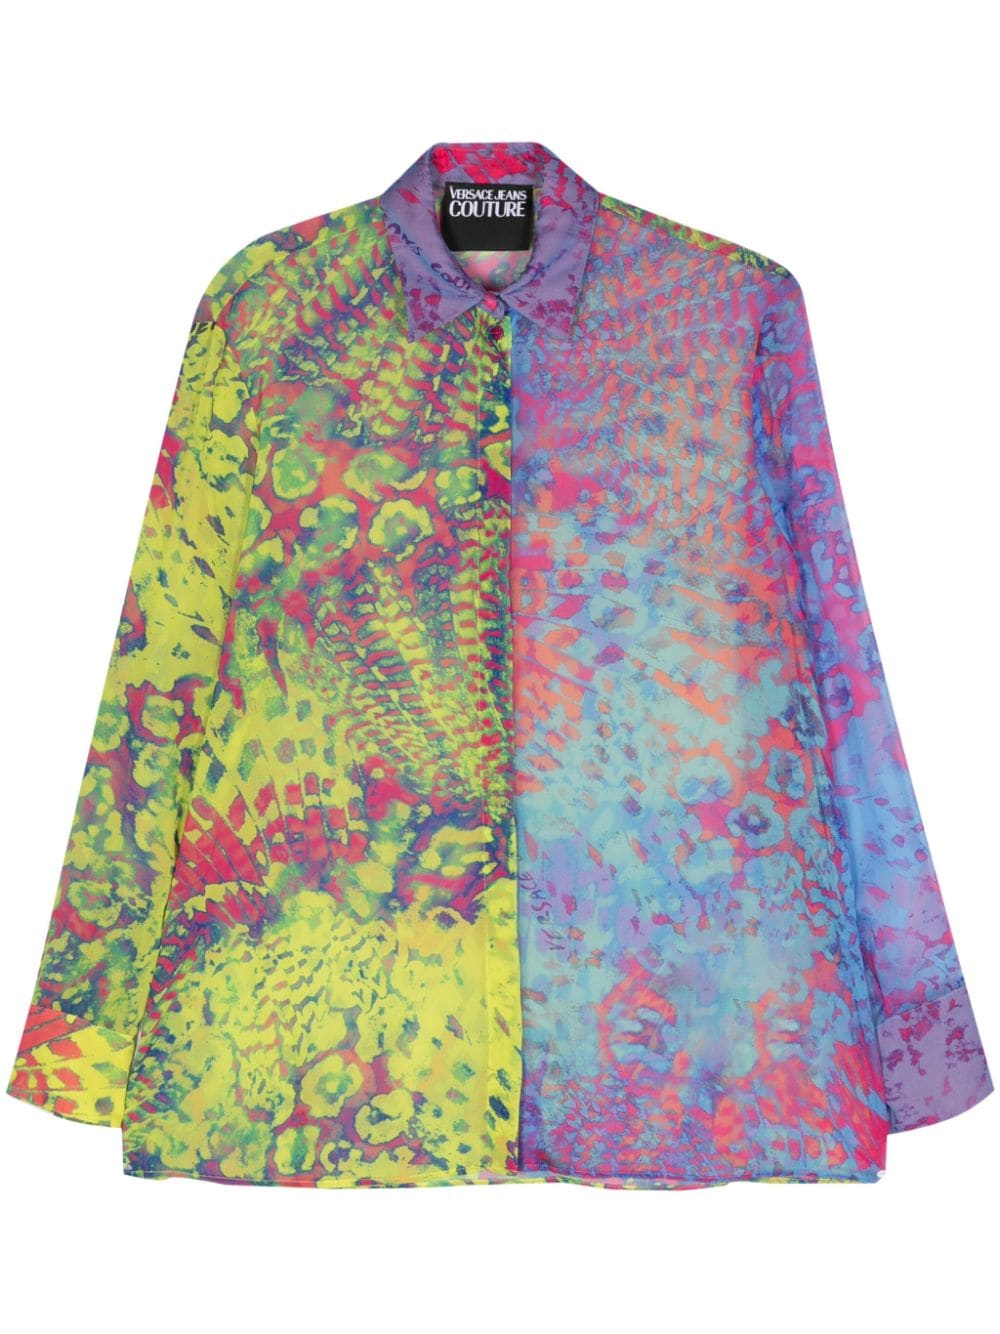 Versace Jeans Couture abstract-print sheer shirt - Blue von Versace Jeans Couture